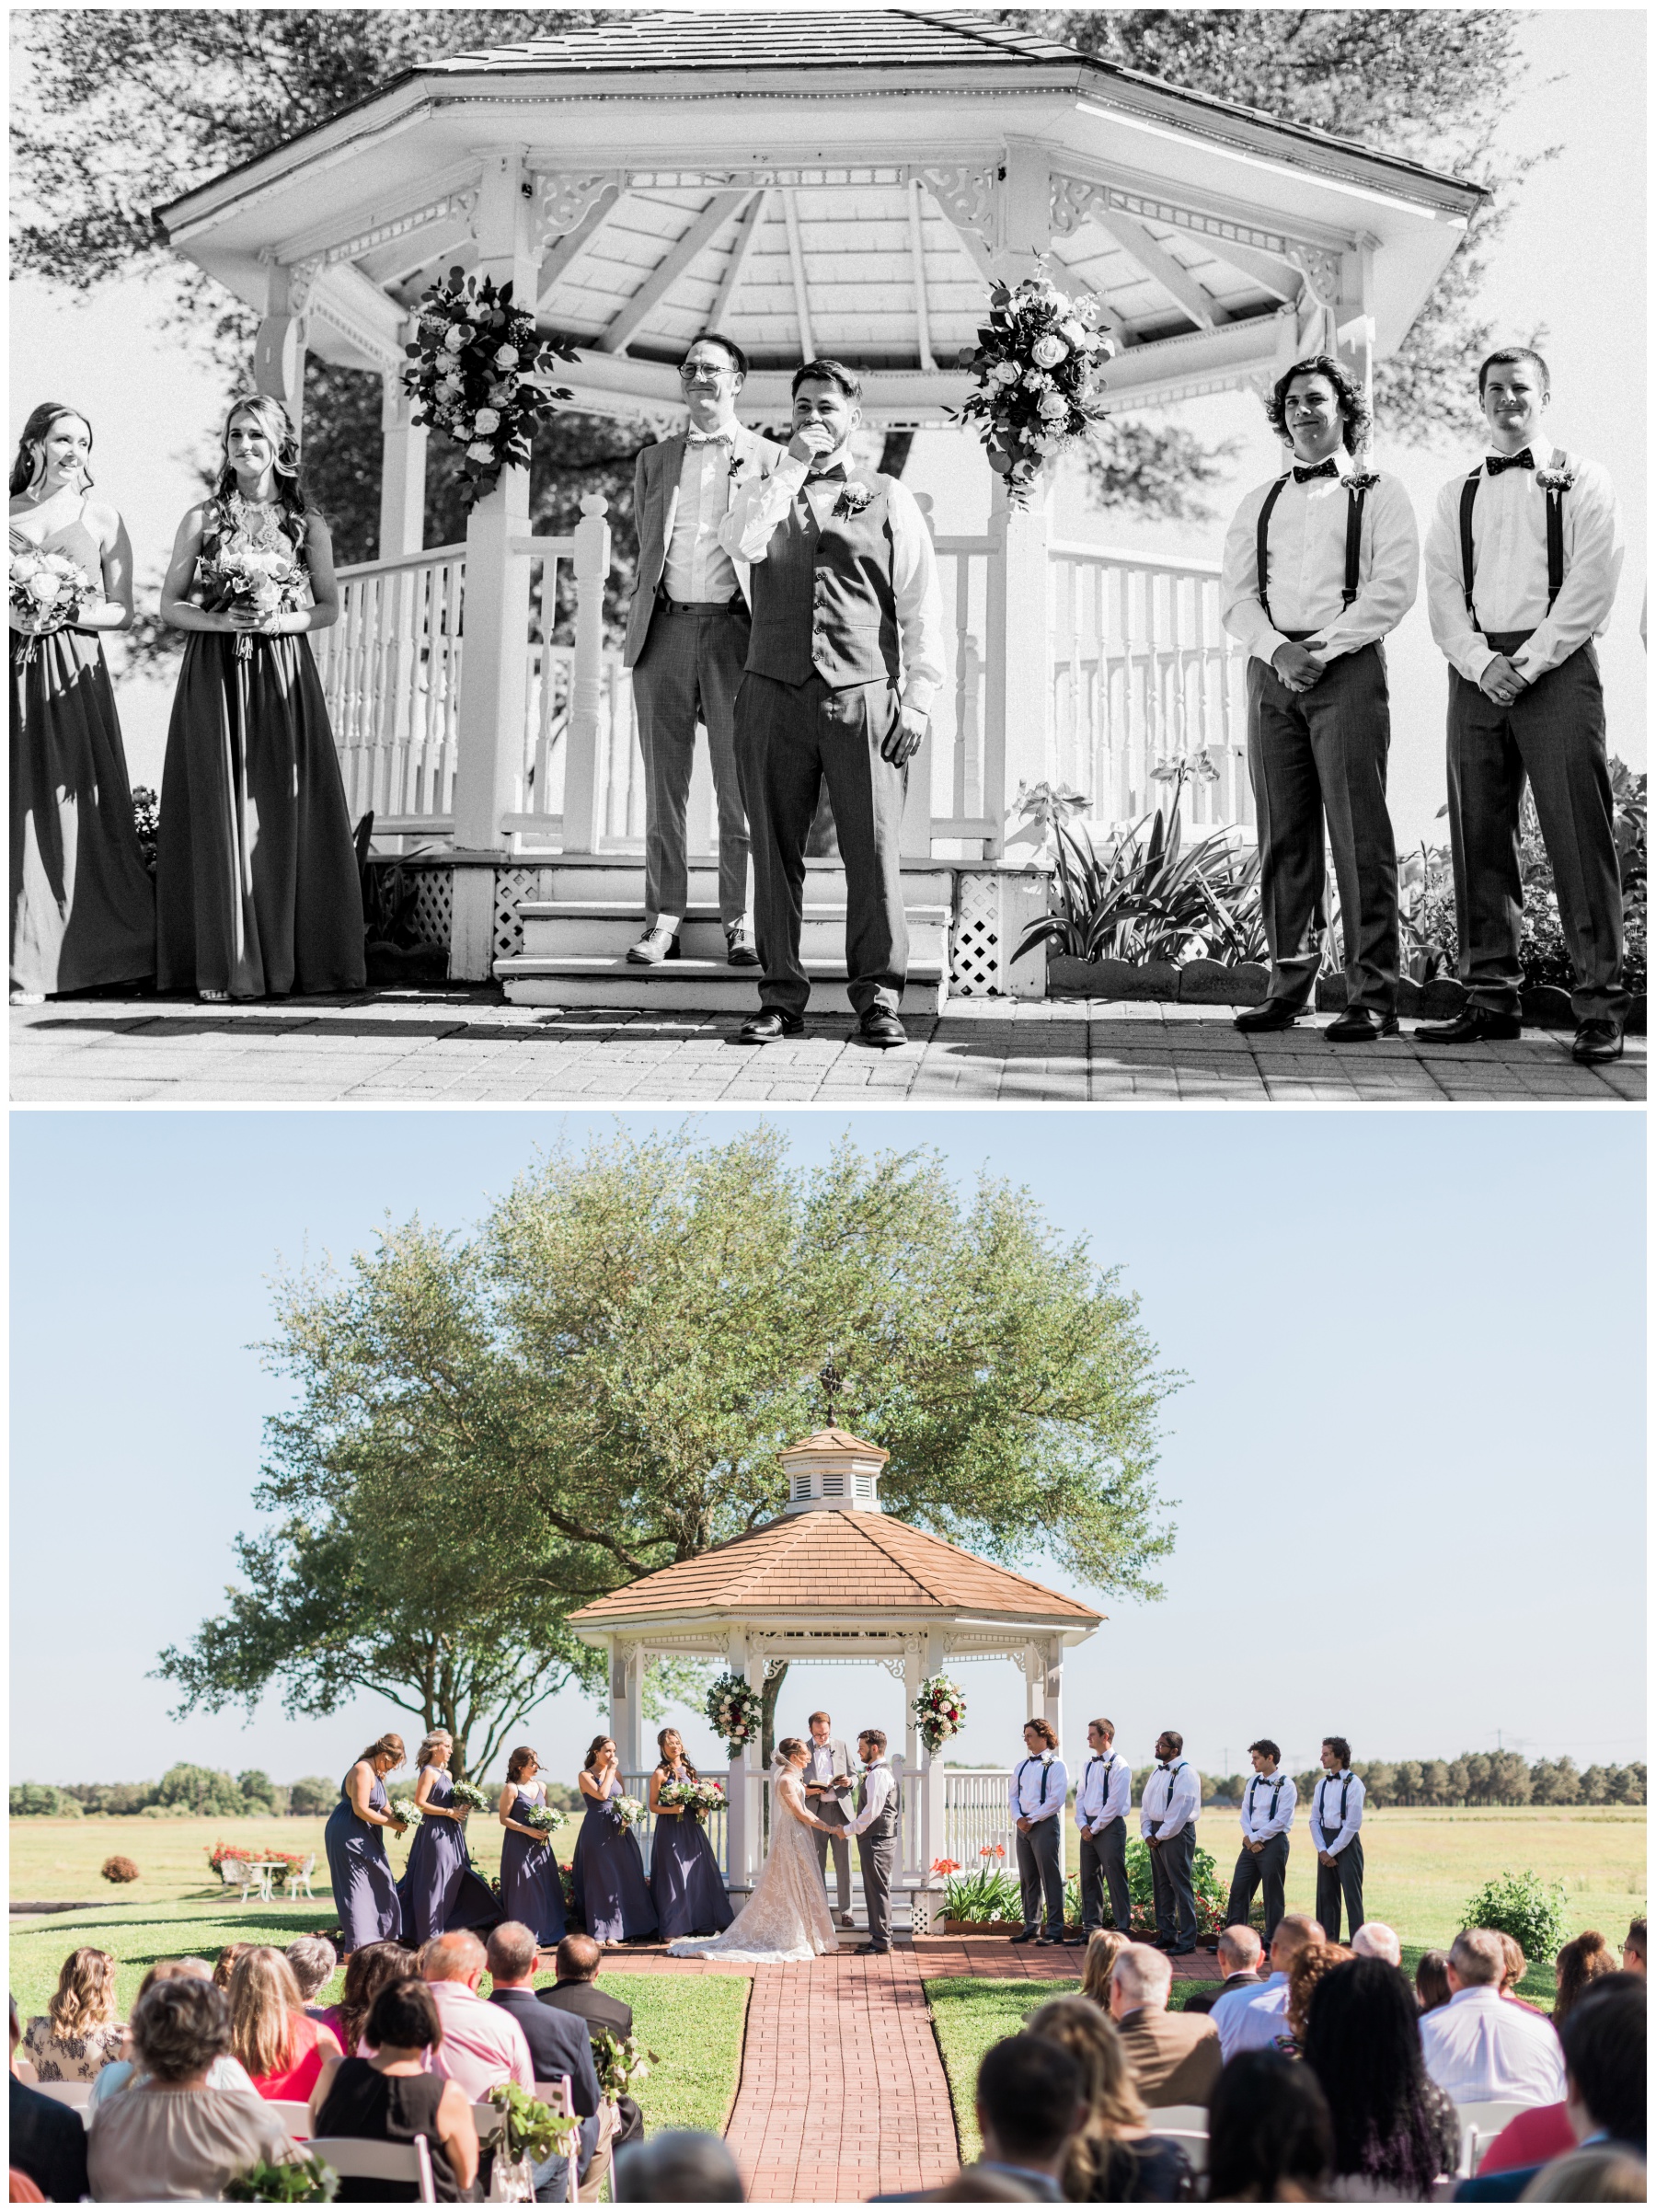 Wedding ceremony on the lawn of House Estate in Houston, Texas